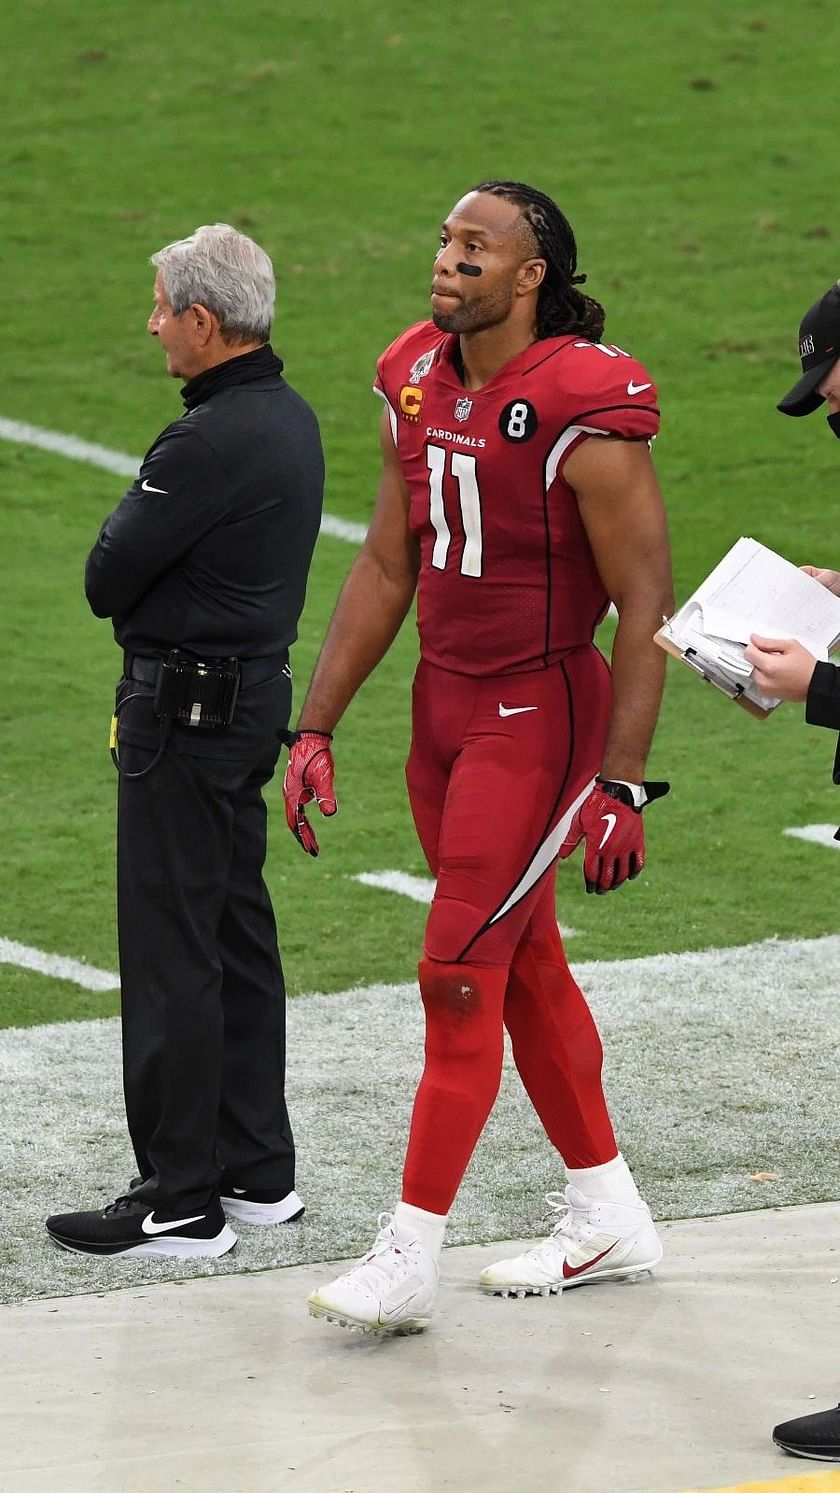 Larry Fitzgerald will not be returning to Arizona Cardinals